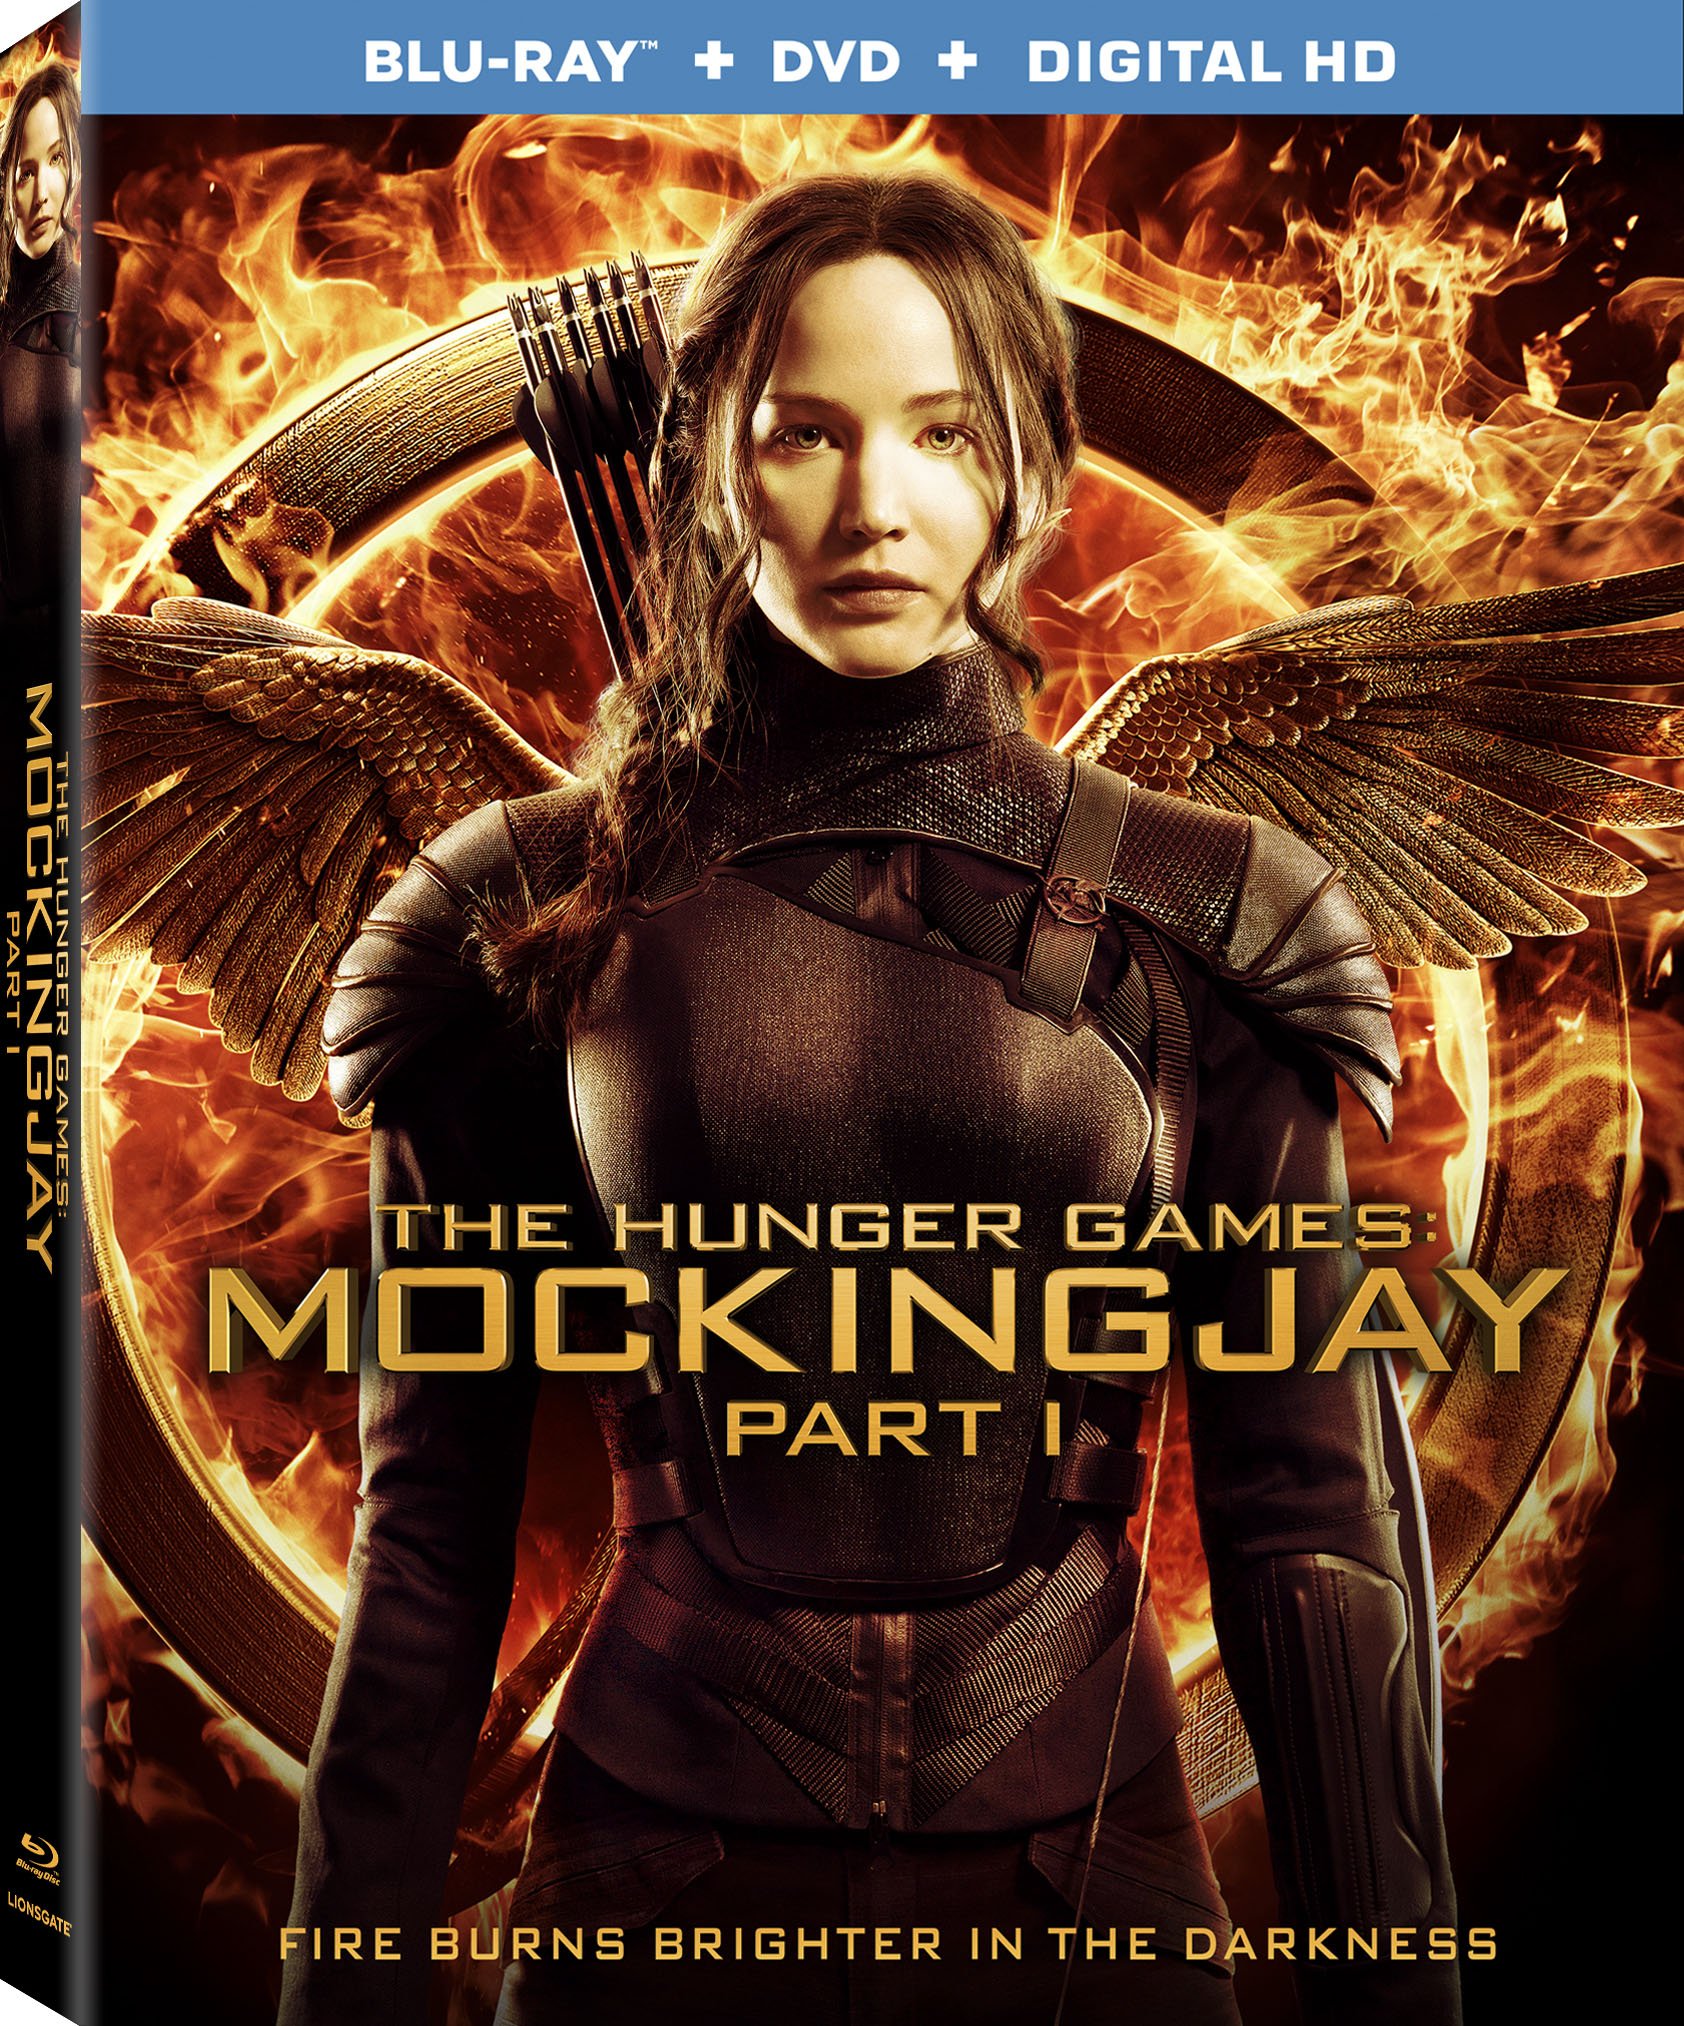 The Hunger Games: Mockingjay - Part 1 #9